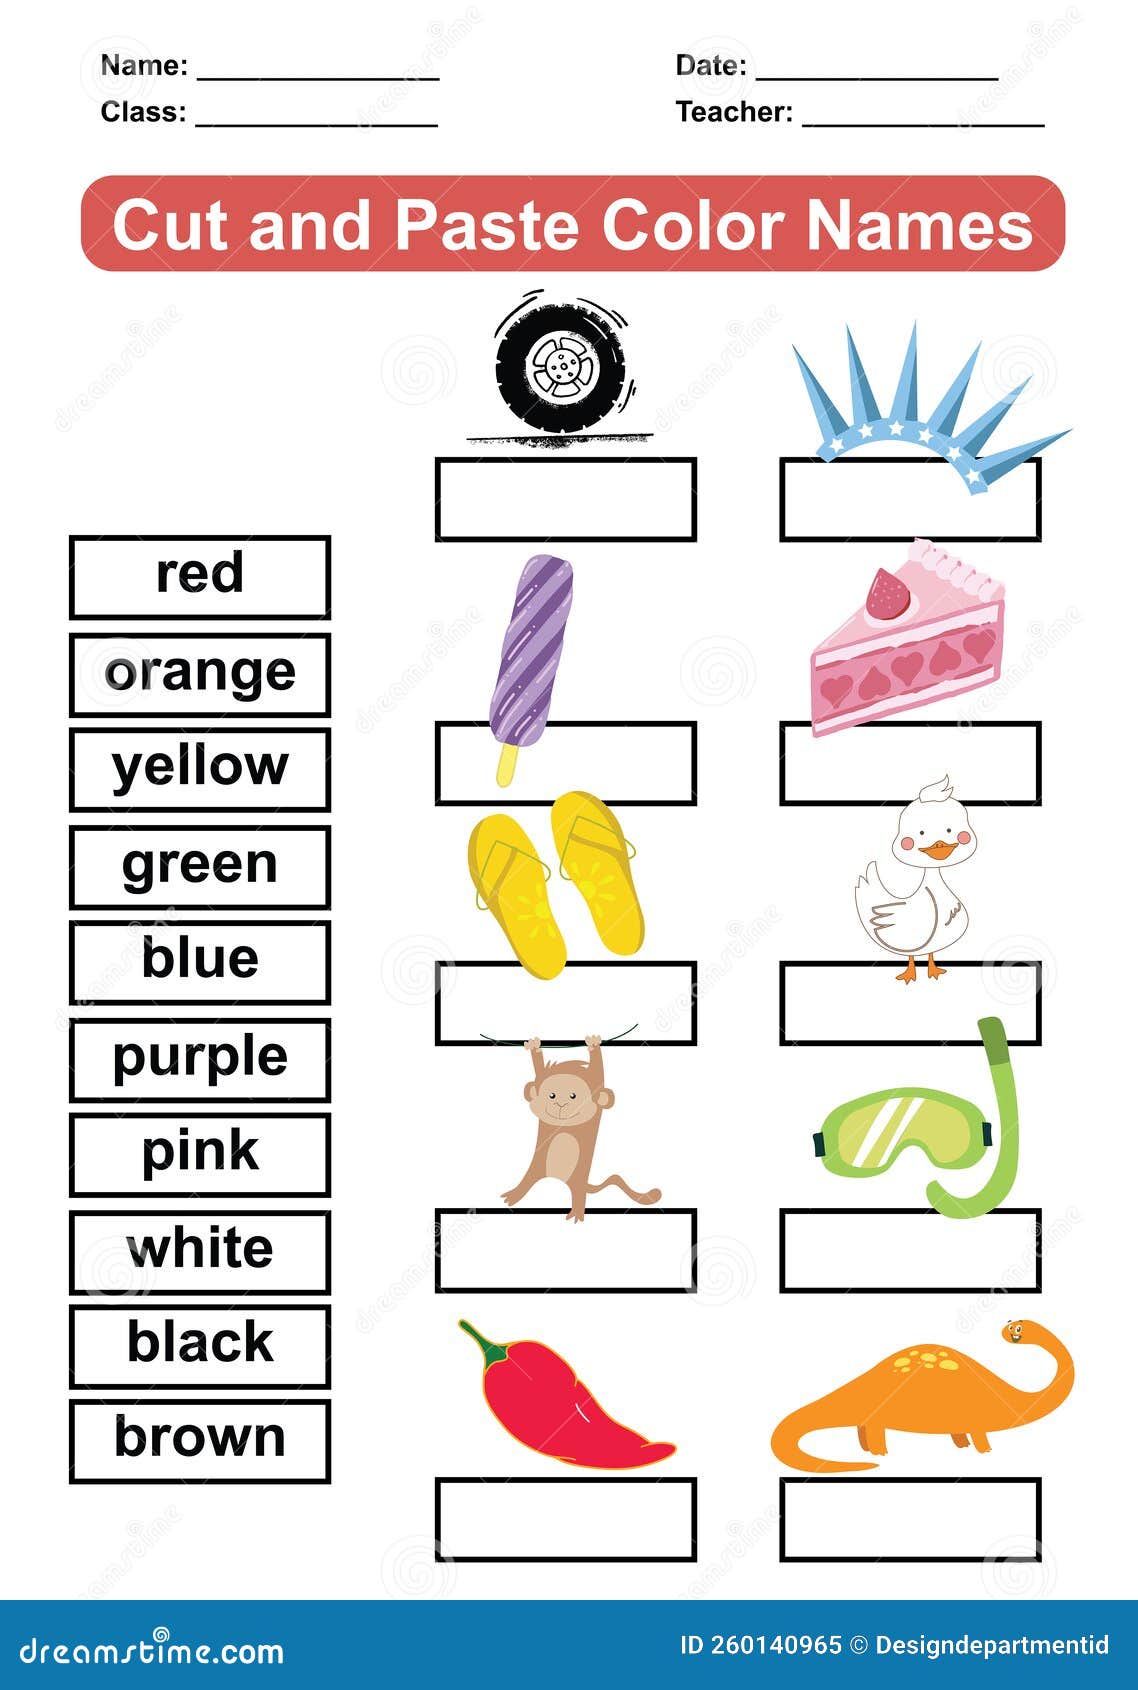 Cut and Paste the Color Names. Worksheet for Children To Recognize